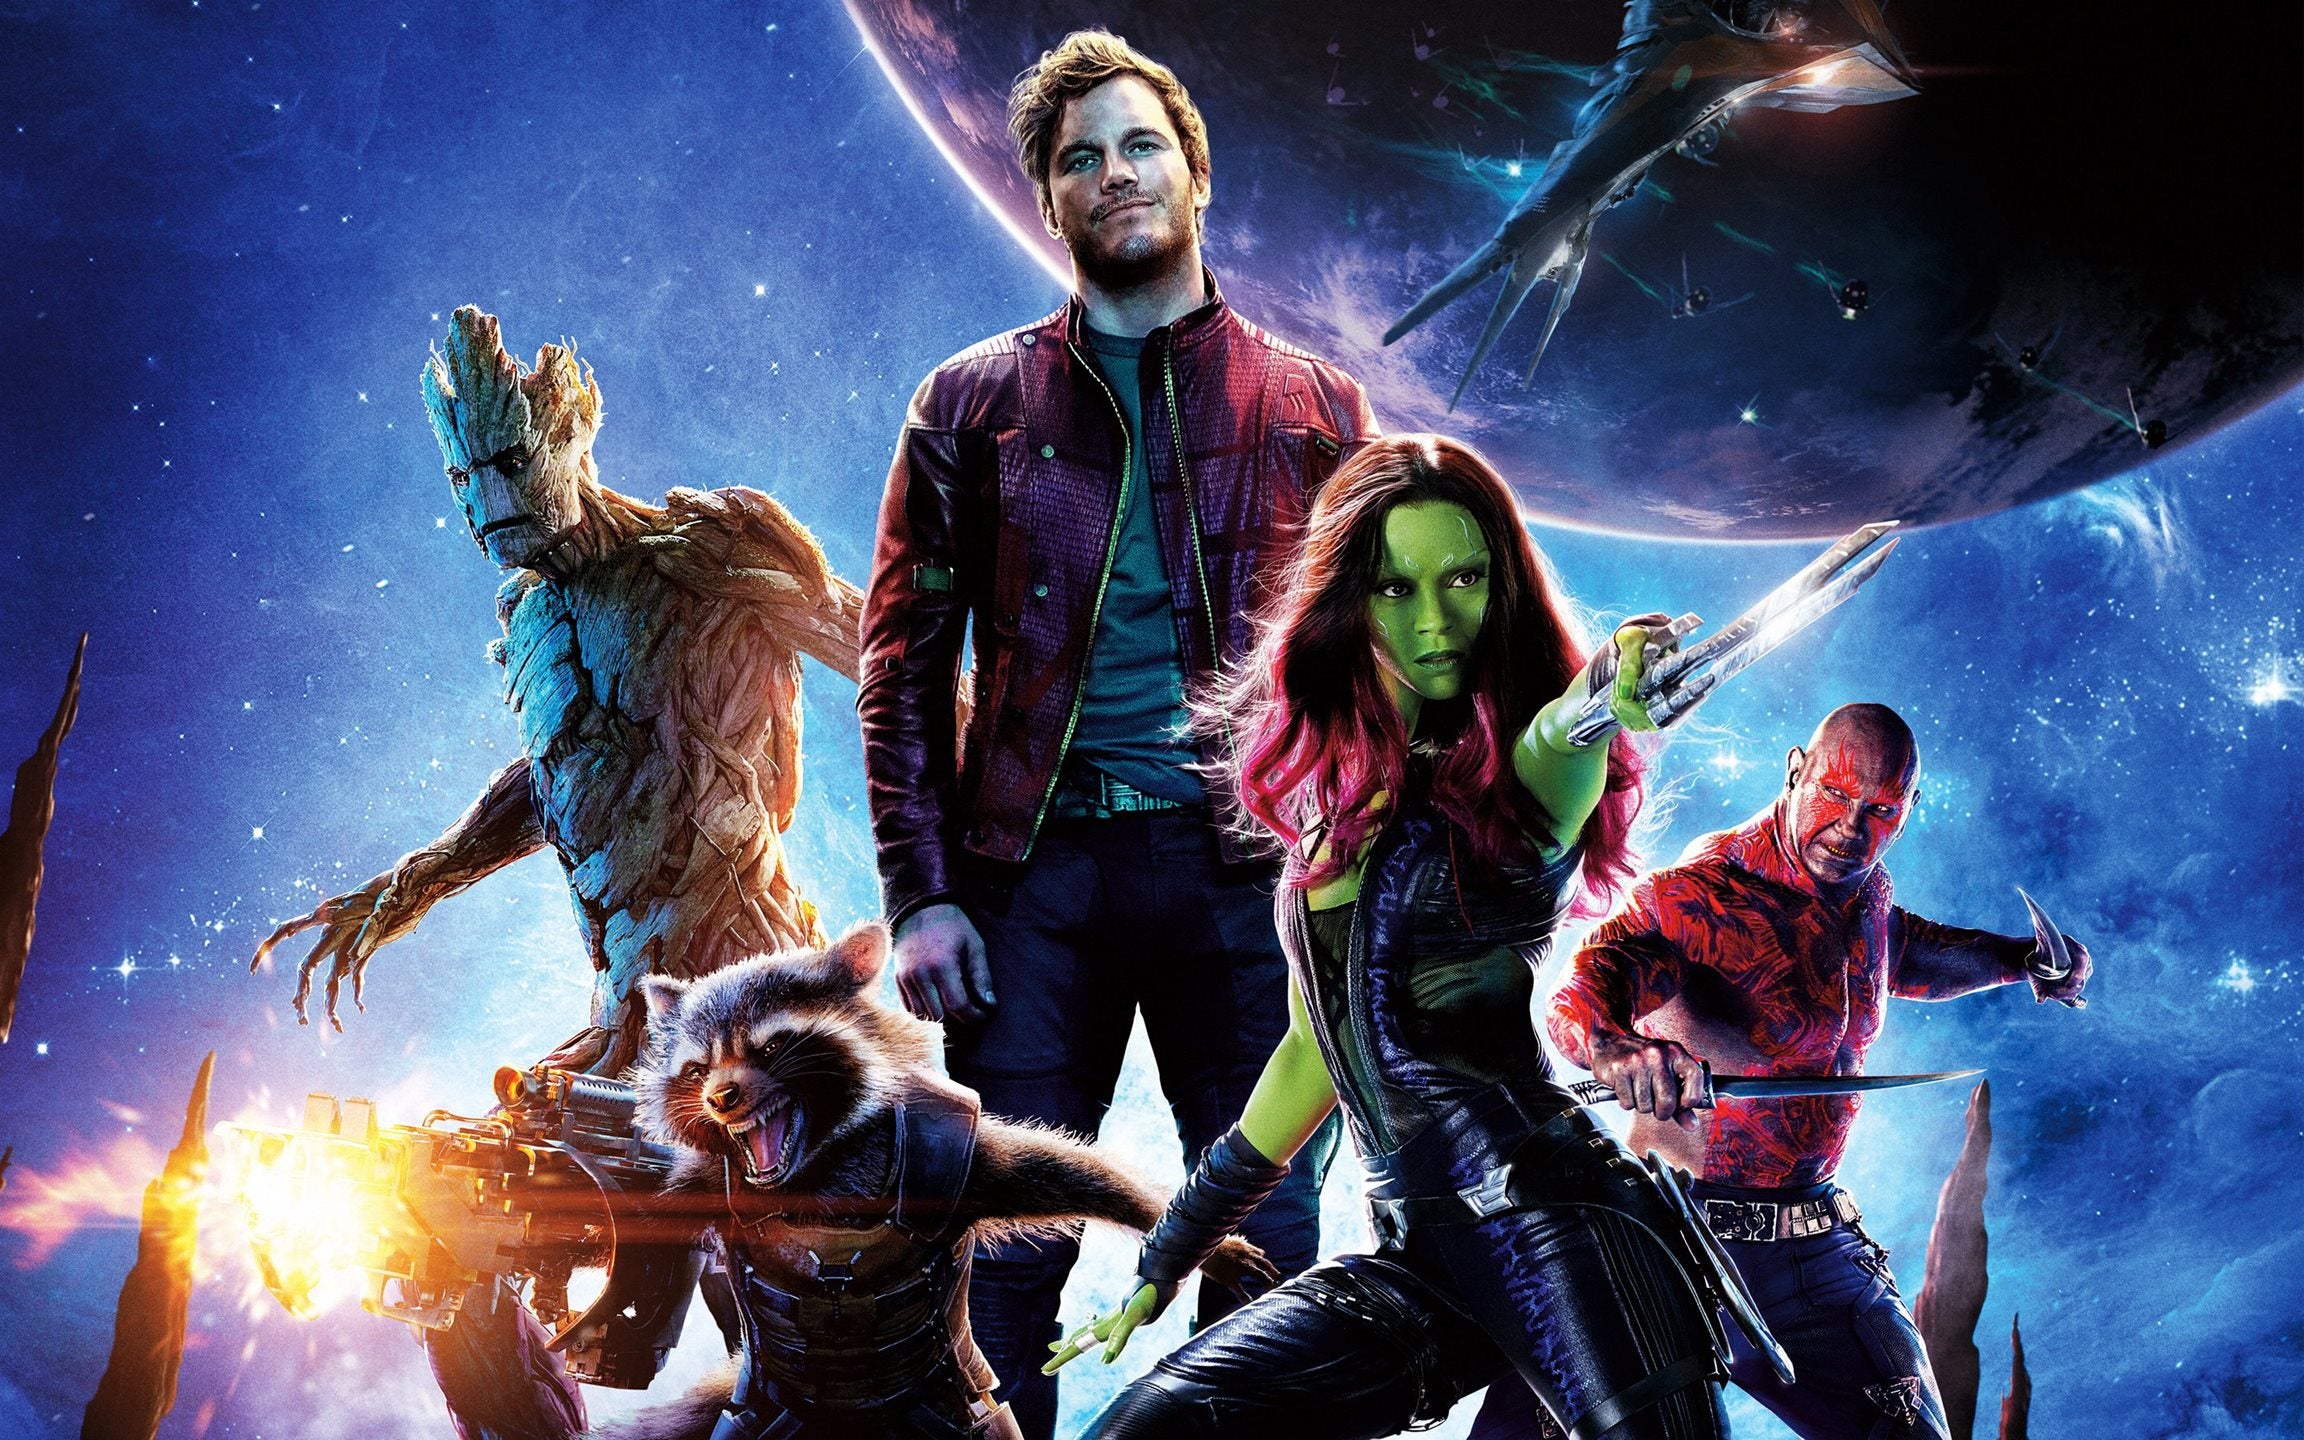 Image for Deus Ex developers also working on a Guardians of the Galaxy game - report